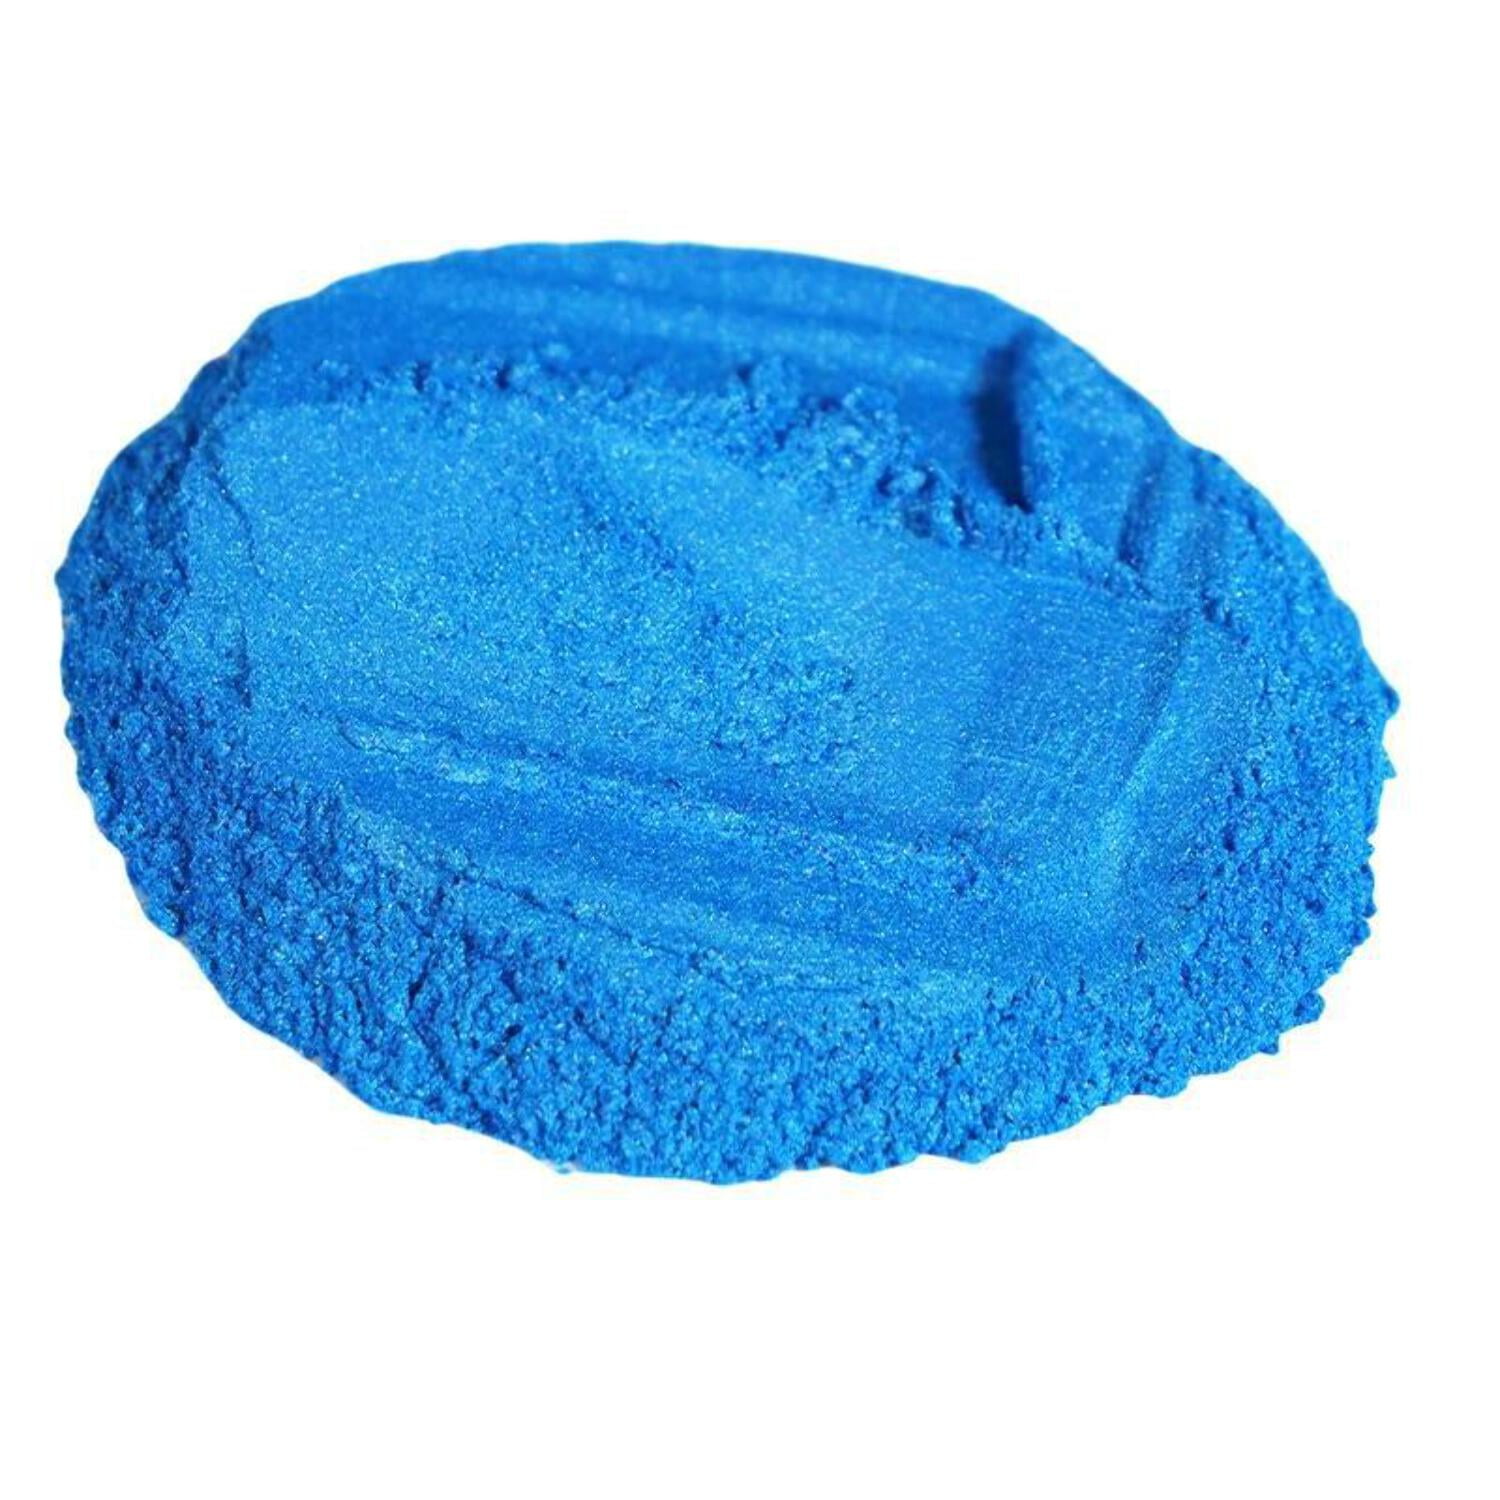 Blue Pigment for Epoxy Resin - Mica Powder Blue for Epoxy - 50g Dye —  BALTIC DAY